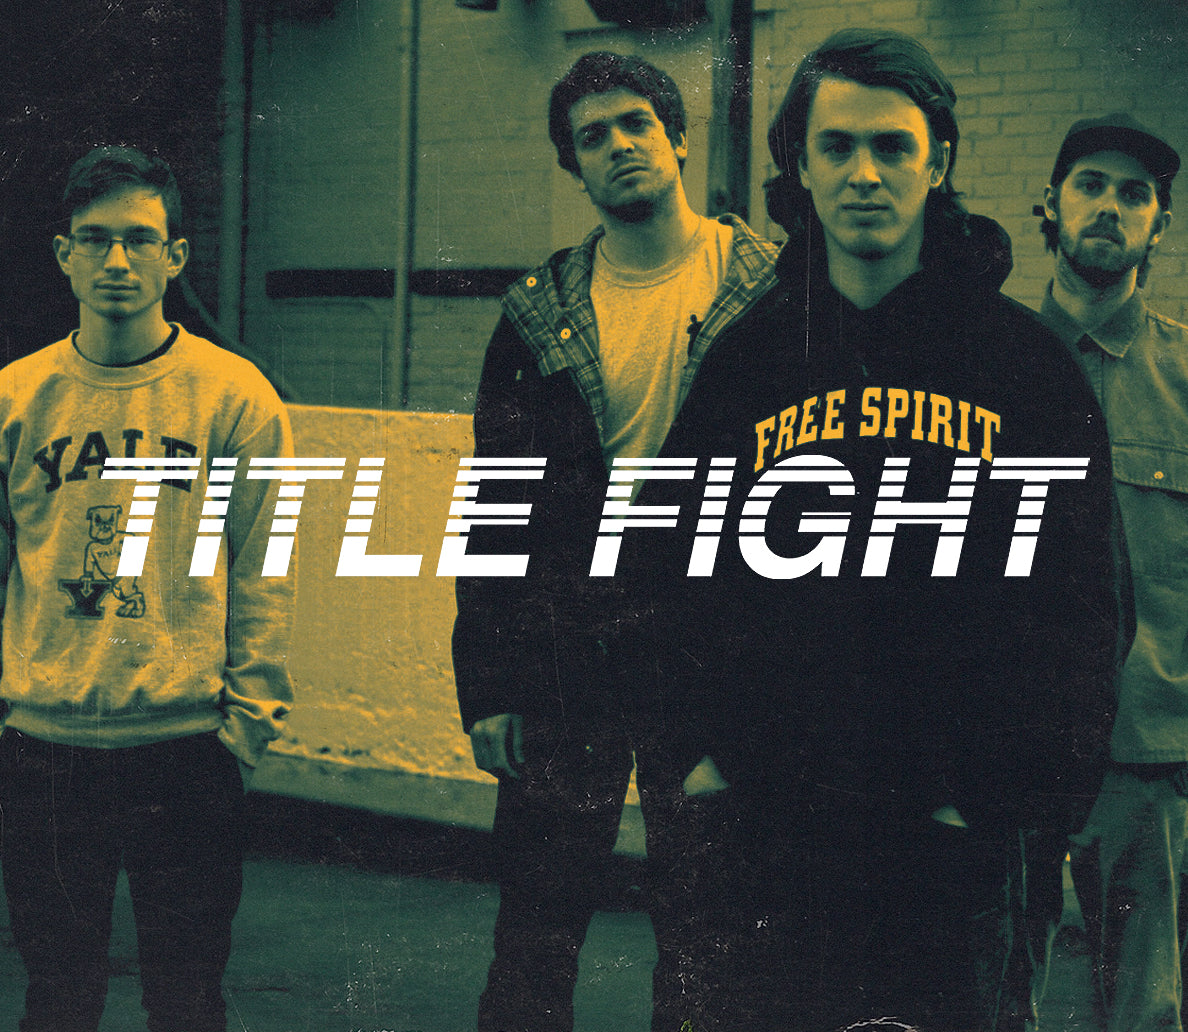 Buy - Shop - Title Fight - Exclusive - Band Merch - Music Merch - Cold Cuts Merch